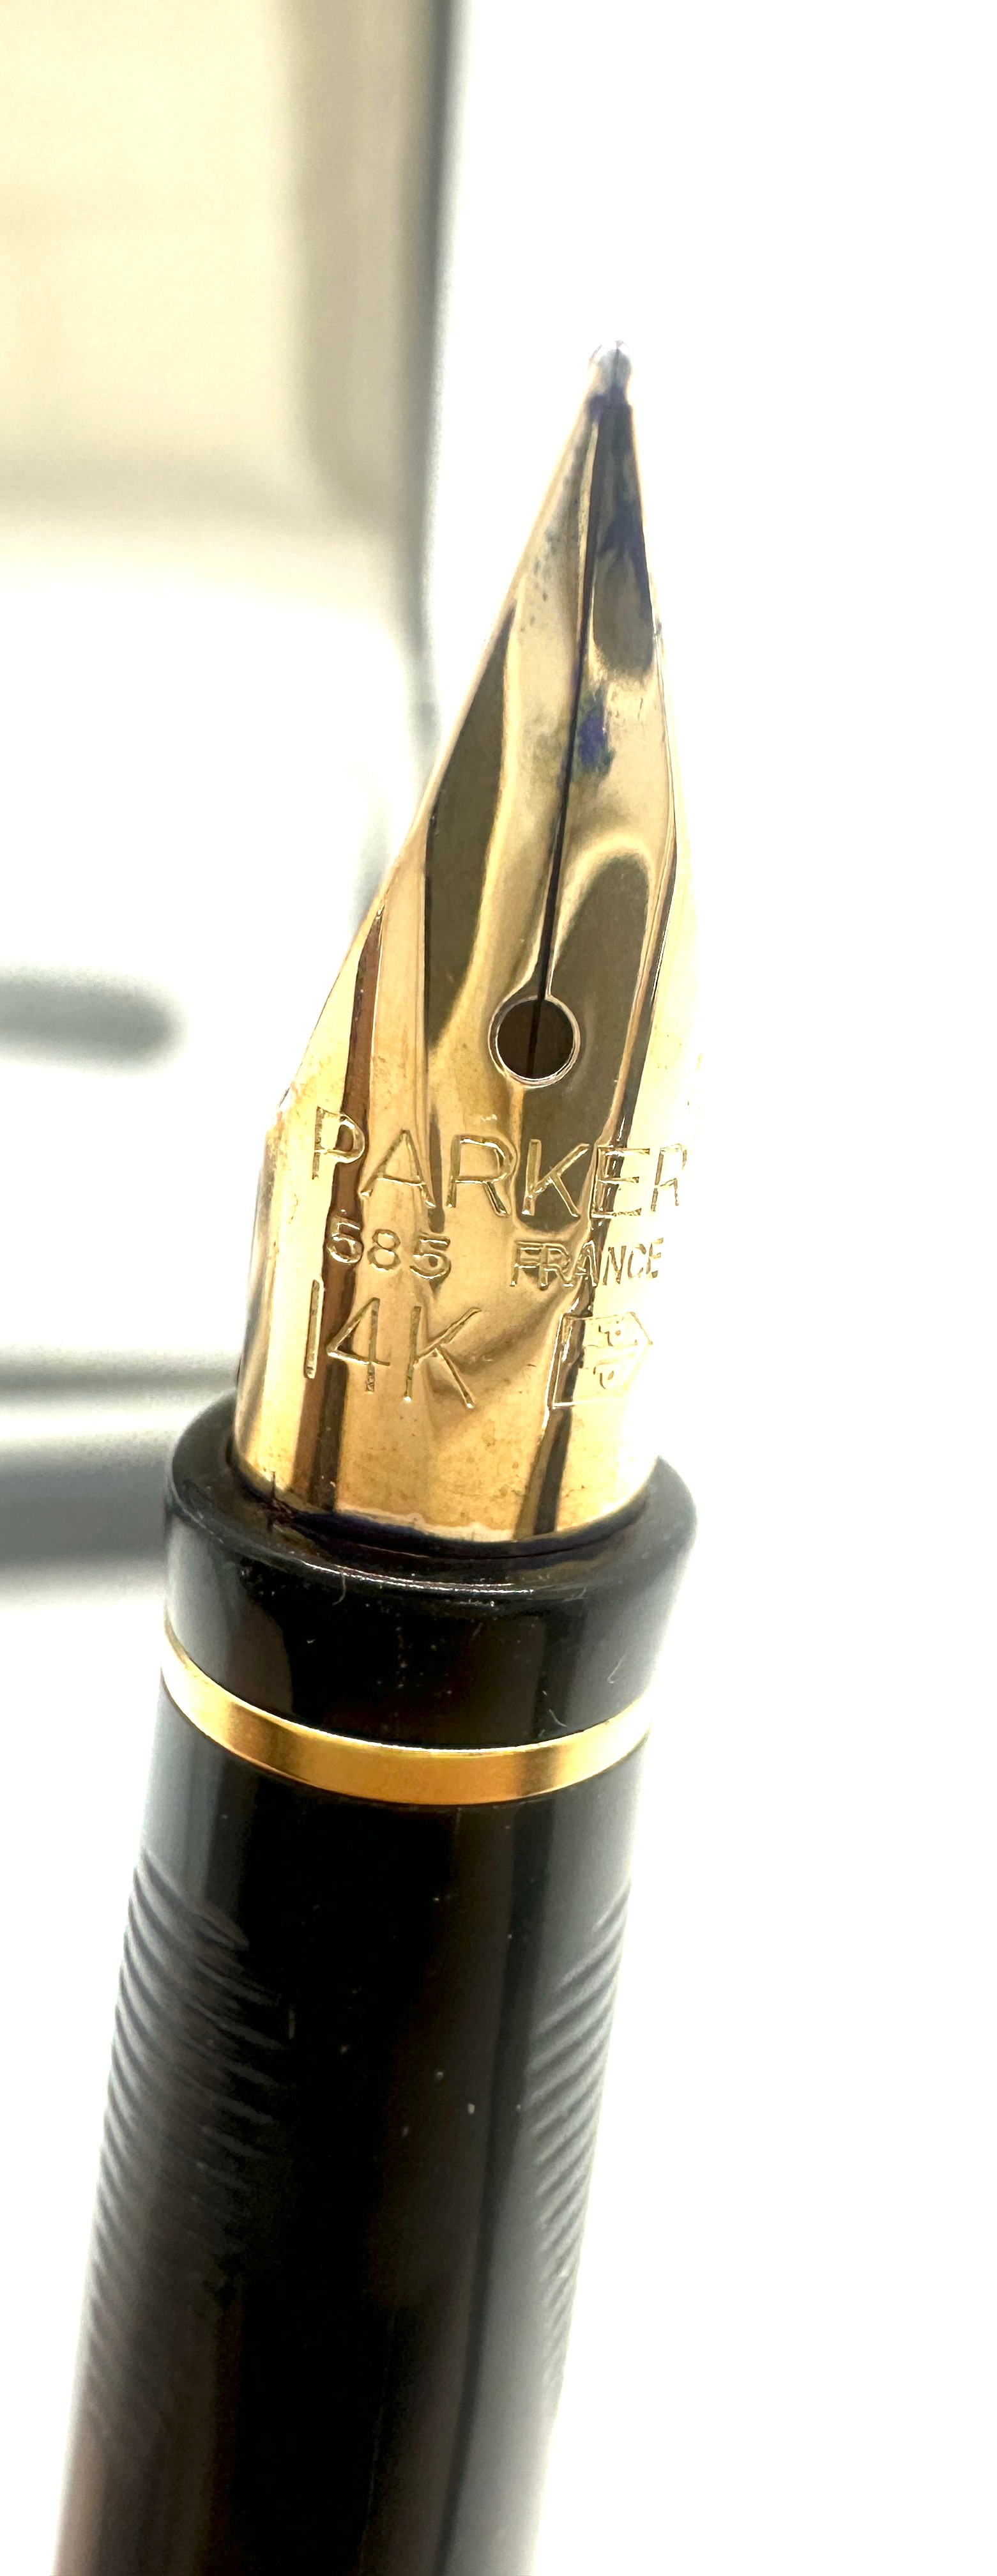 Boxed unused parker thuya 4173 with 14ct gold nib - Image 6 of 8